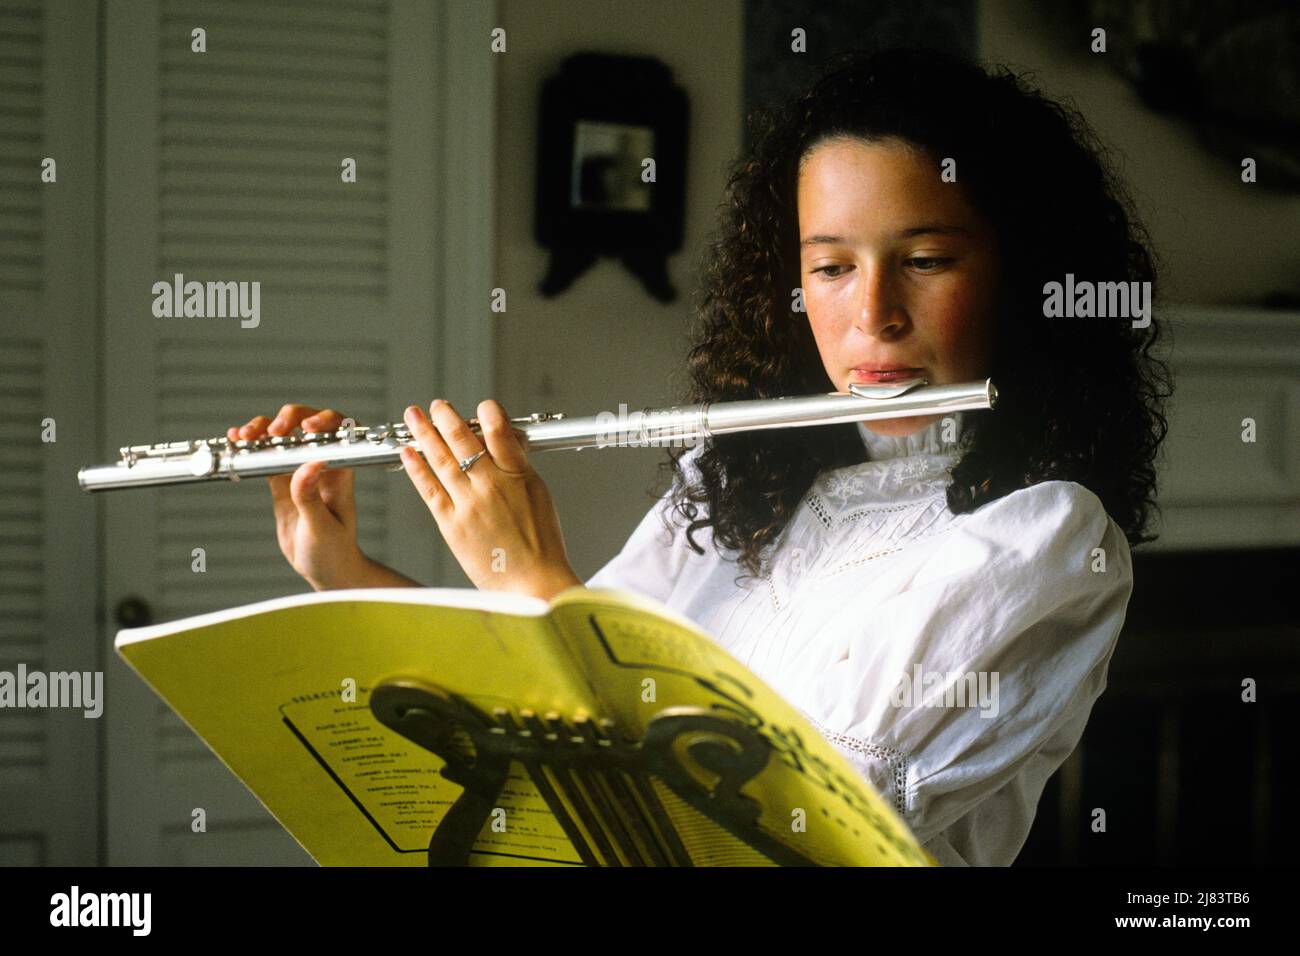 1980s BRUNETTE TEENAGE GIRL PLAYING A FLUTE READING SHEET MUSIC ON BRASS MUSIC STAND - km9833 NET002 HARS HOME LIFE COPY SPACE HALF-LENGTH PERSONS PRACTICE TEENAGE GIRL FLUTE BRASS CONFIDENCE BRUNETTE GOALS SCHOOLS PERFORMING ARTS SKILL PERFORMER PRIDE ENTERTAINER HIGH SCHOOL MUSICAL INSTRUMENT HIGH SCHOOLS CONNECTION TEENAGED ENTERTAINERS FLAUTIST GROWTH JUVENILES PERFORMERS CAUCASIAN ETHNICITY OLD FASHIONED WIND INSTRUMENT Stock Photo